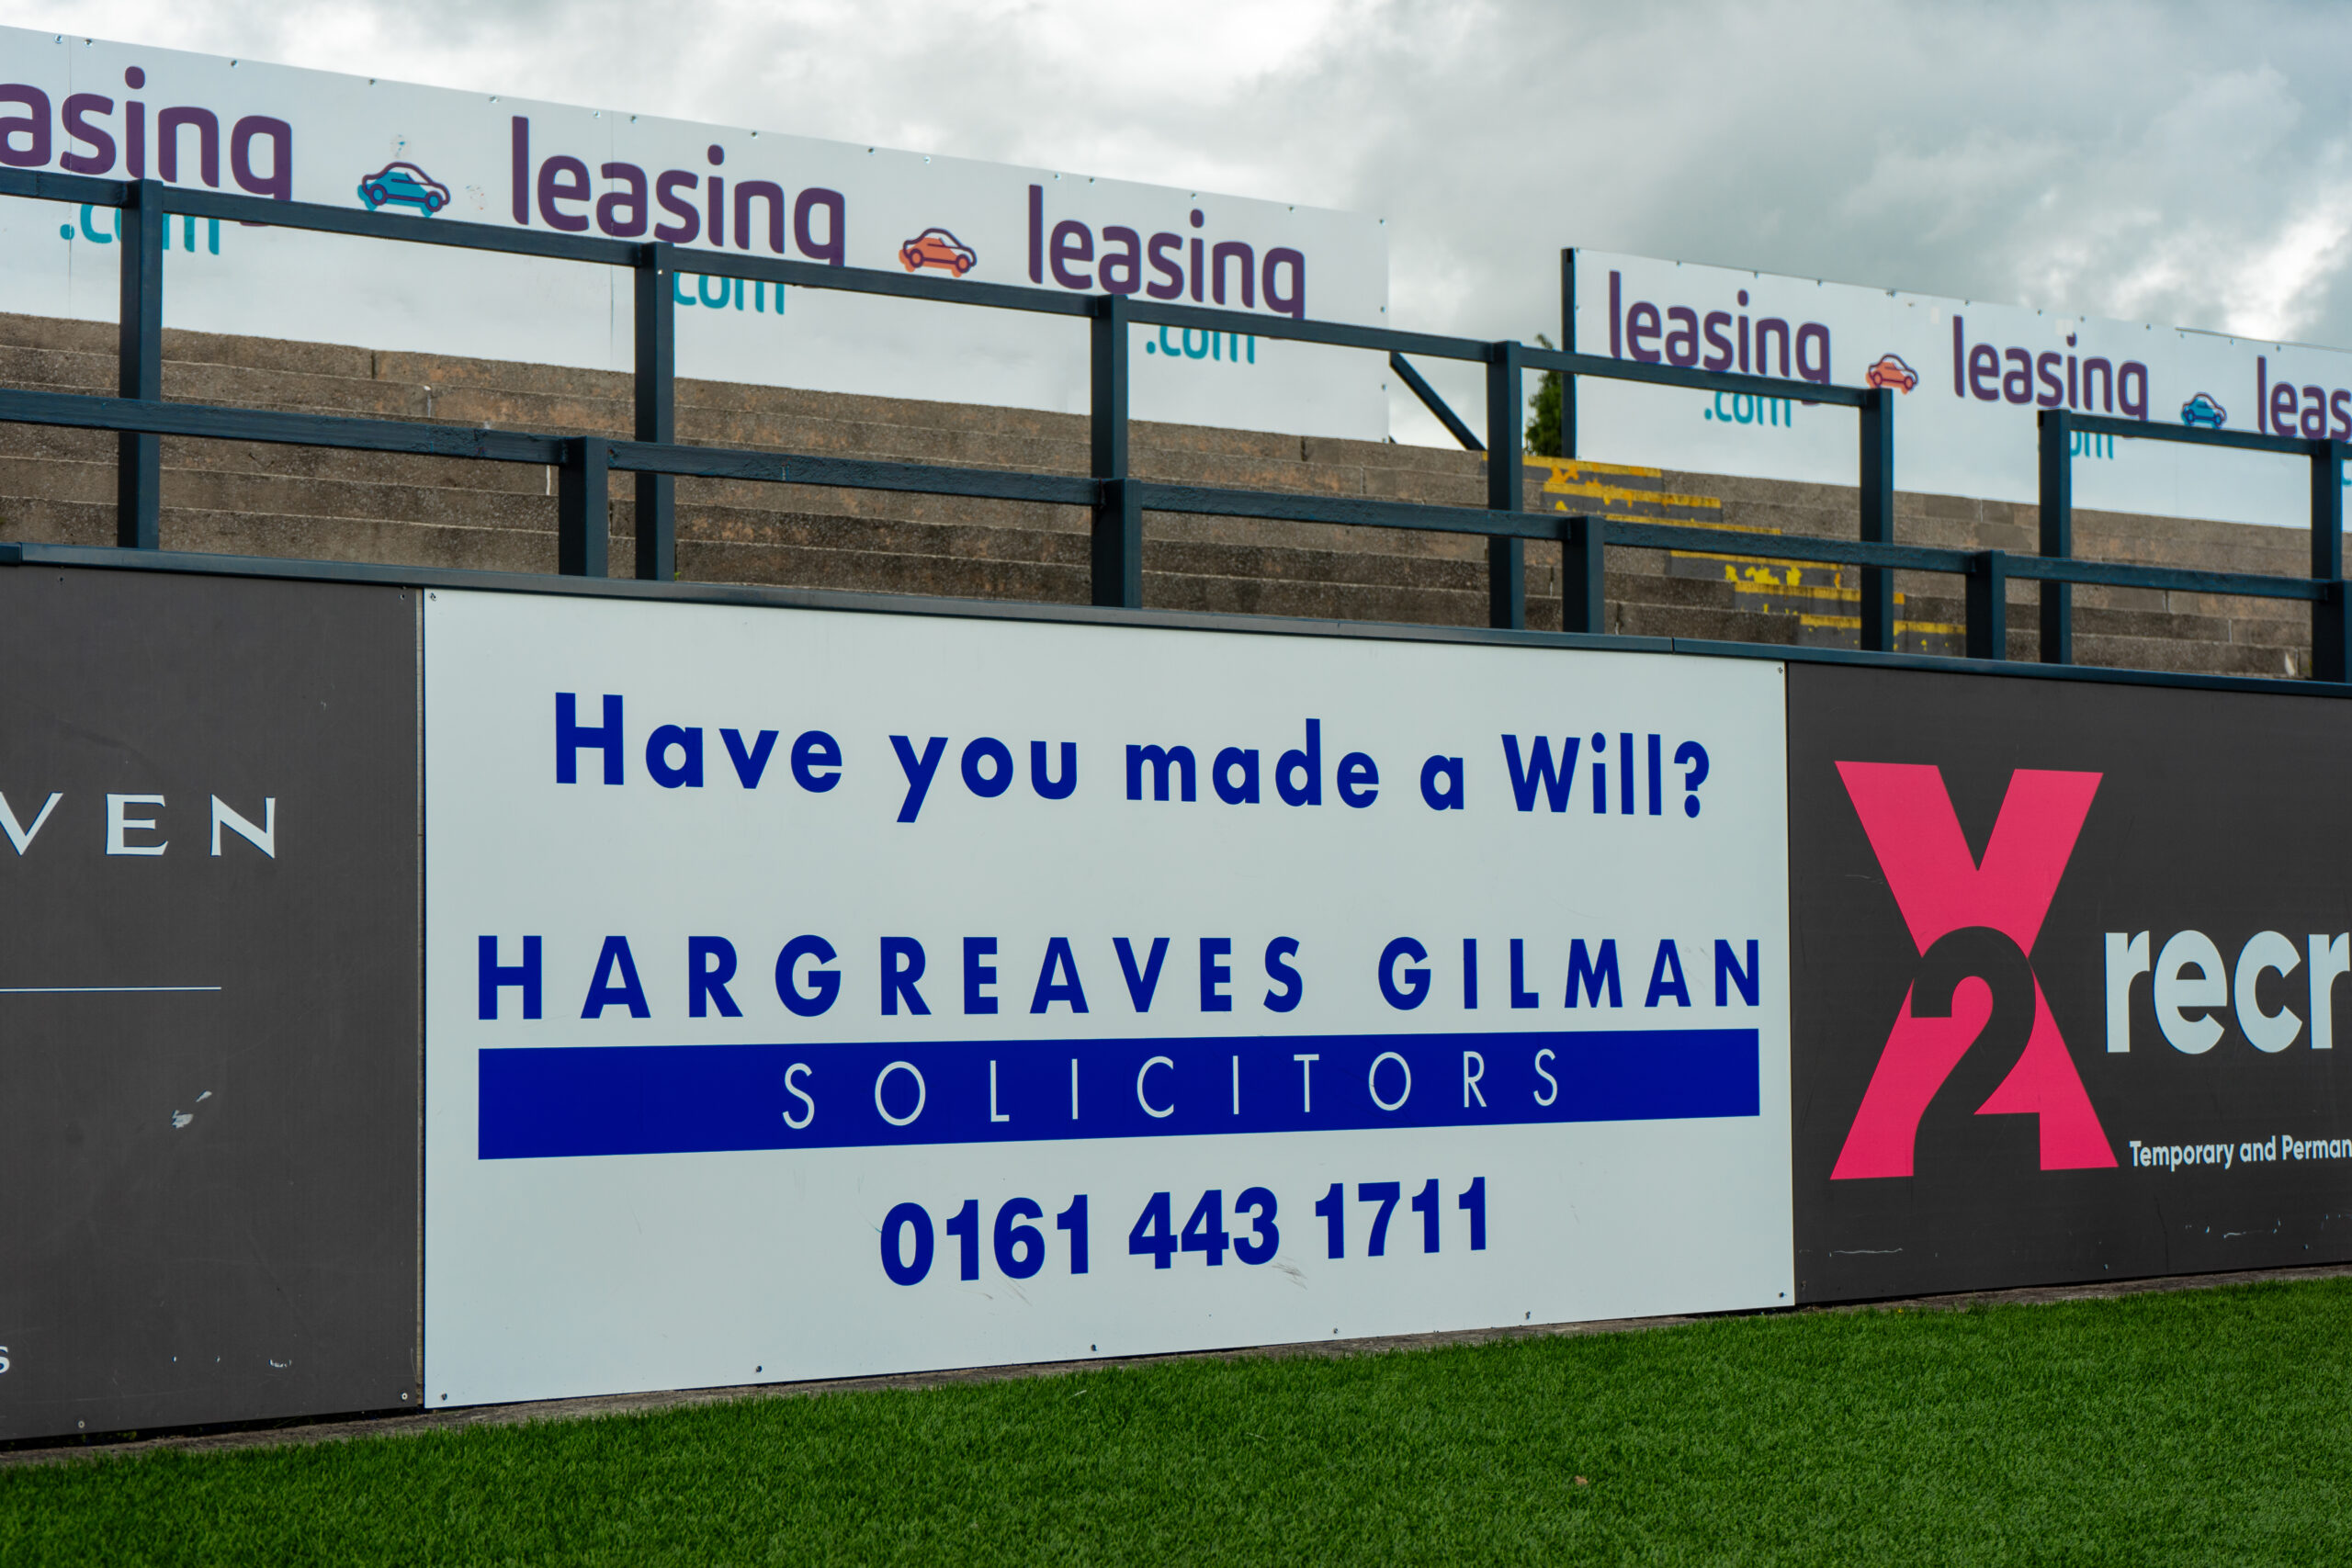 MAJOR NEW SPONSORSHIP ANNOUNCEMENT: HARGREAVES GILMAN SOLICITORS